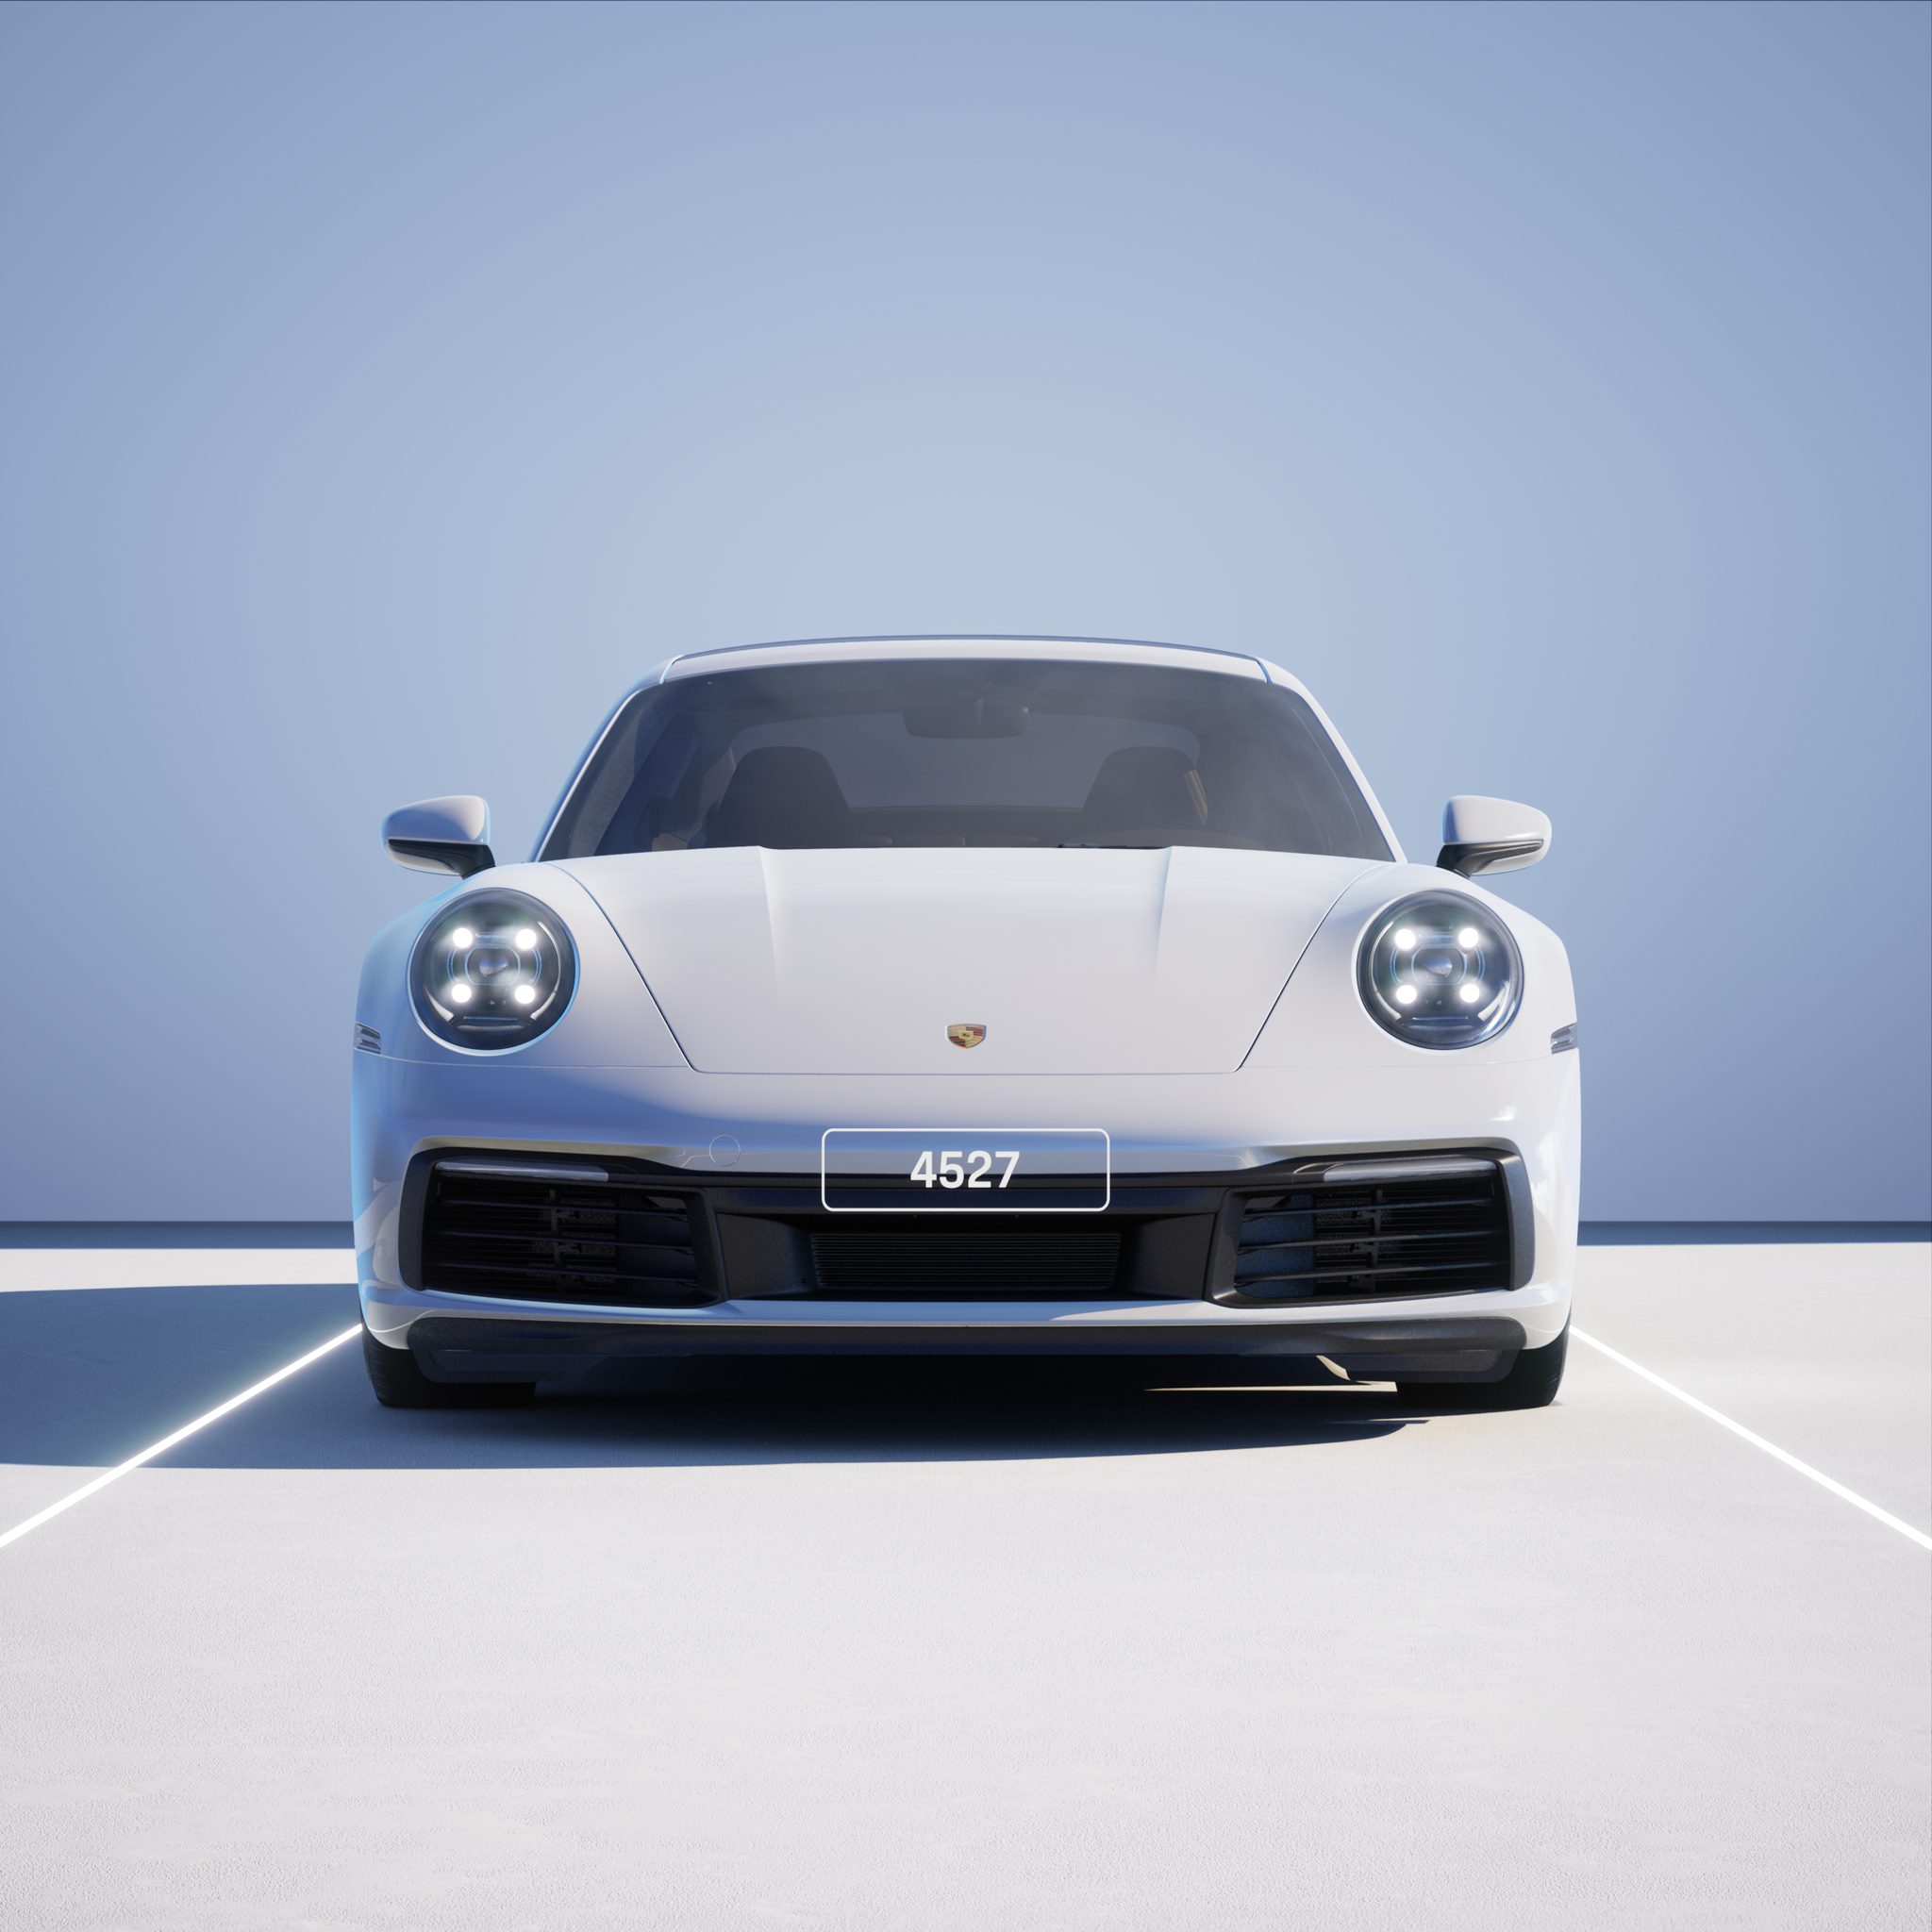 The PORSCHΞ 911 4527 image in phase